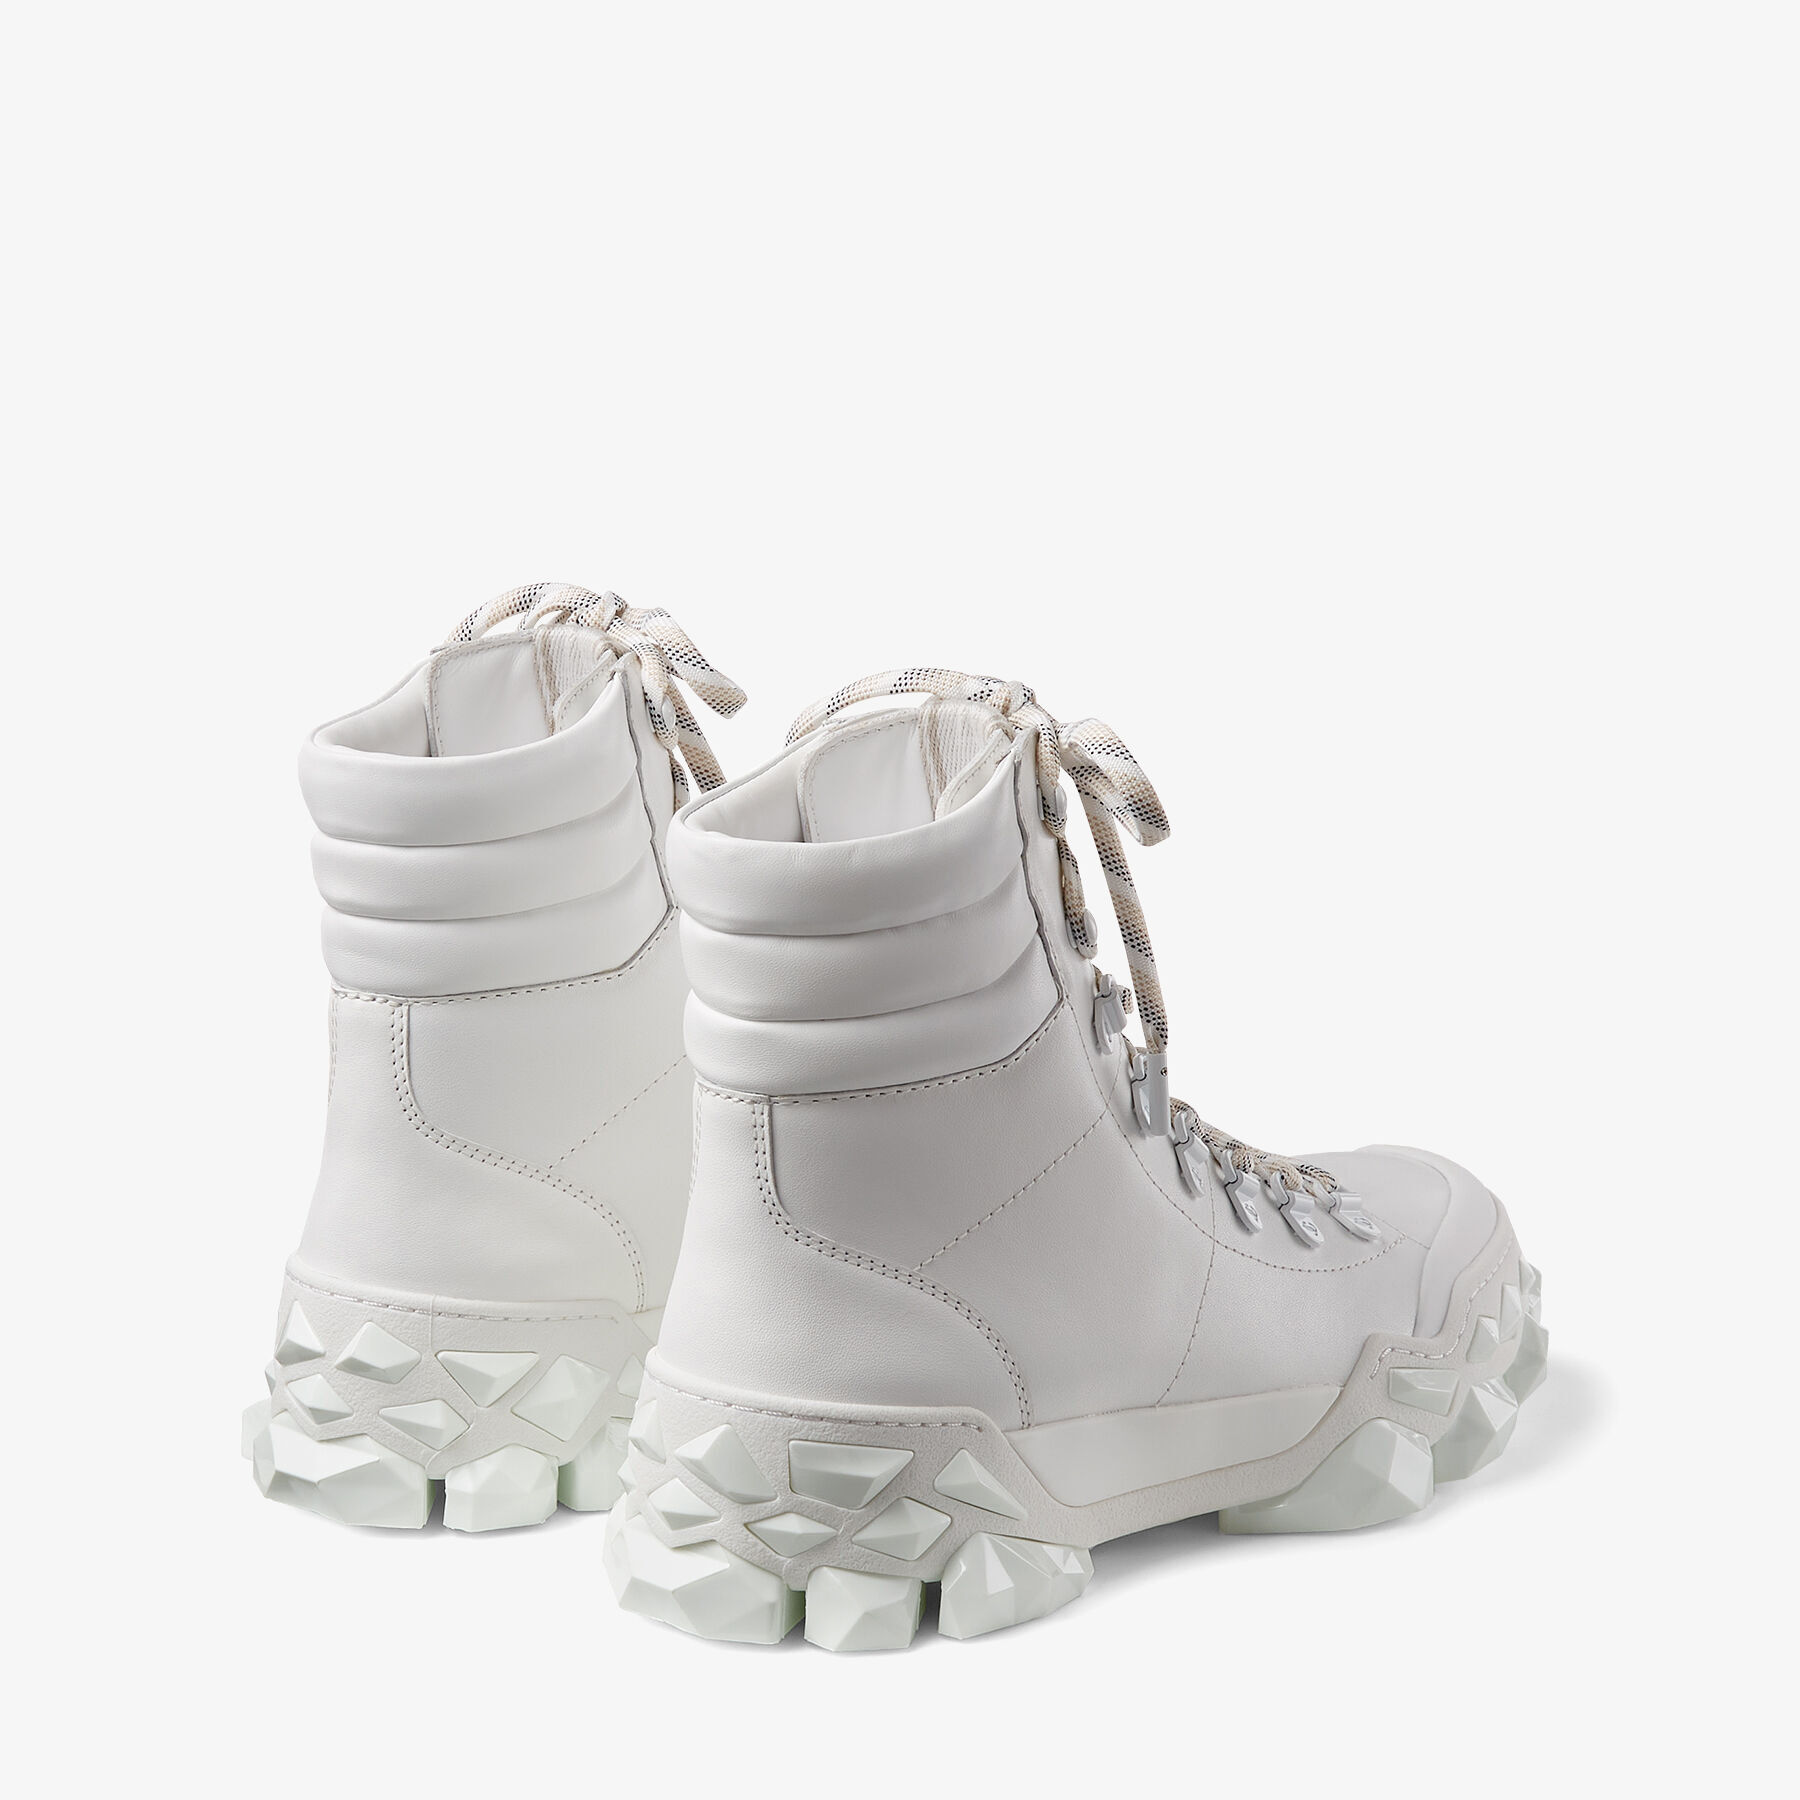 White Smooth Leather Hiking Boots with Mulitfaceted Sole | DIAMOND 